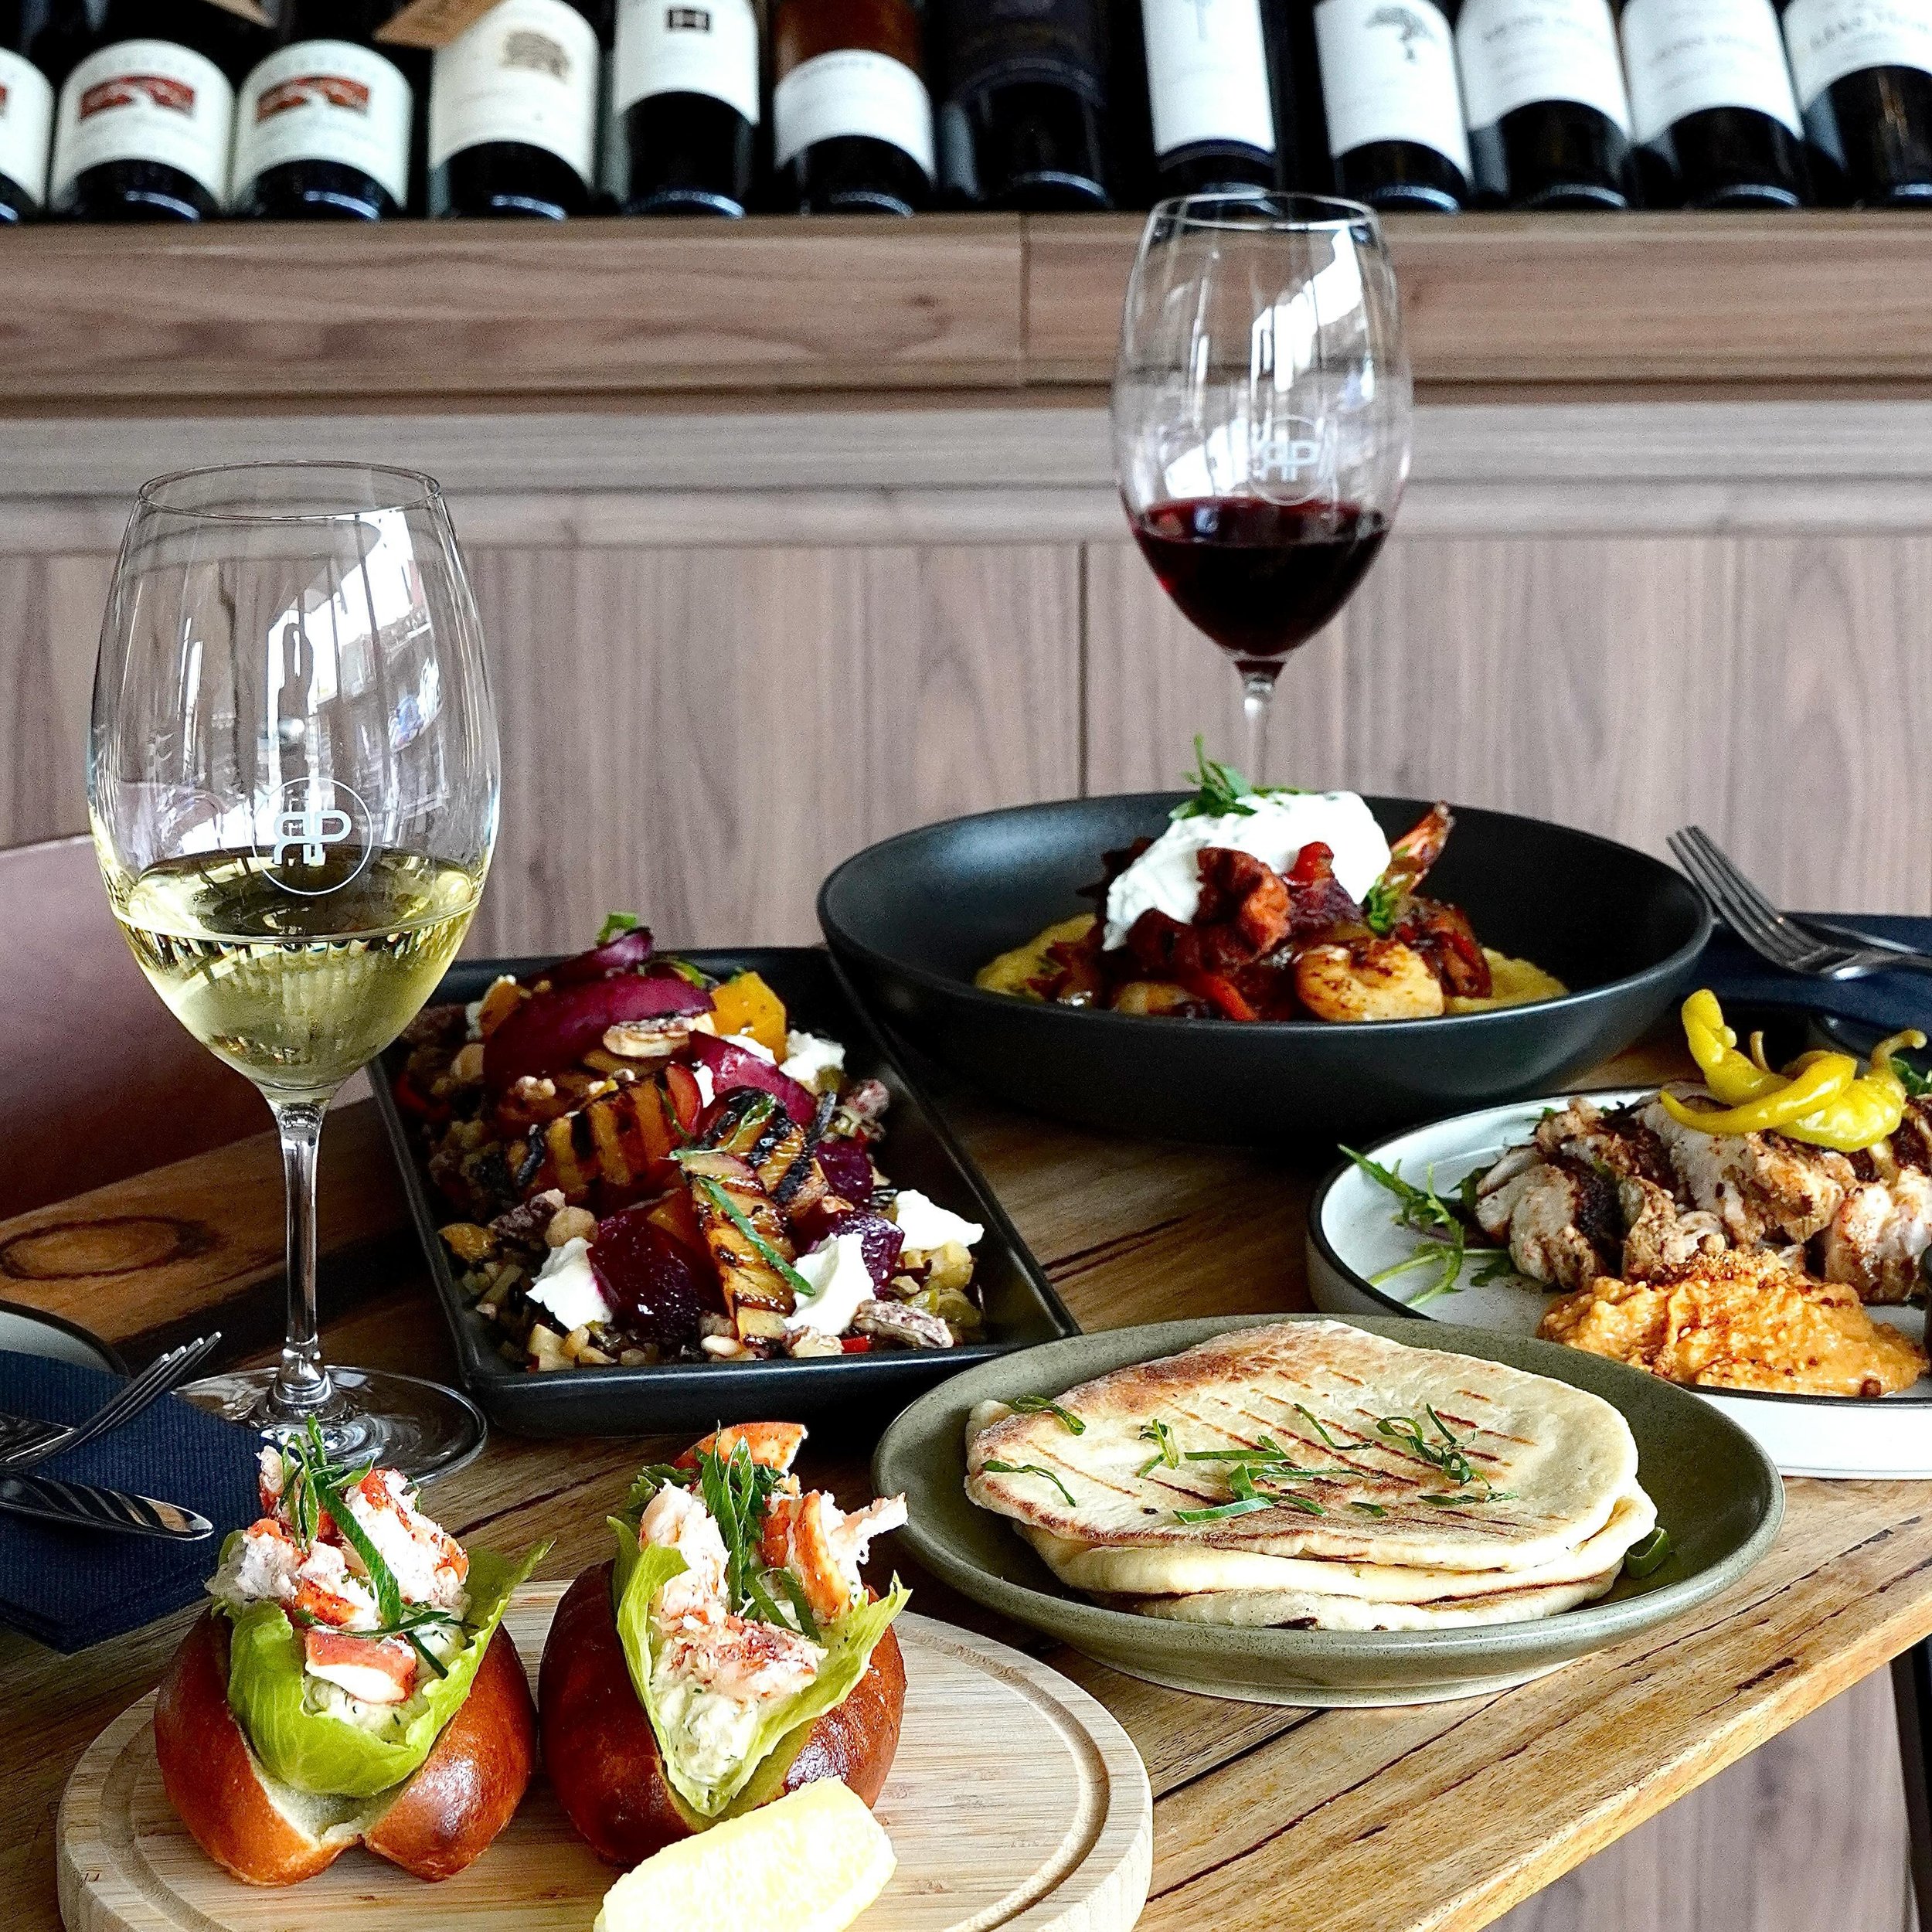 ❄️ It&rsquo;s almost winter&hellip; and it&rsquo;s getting chilly ❄️

What better way to warm up than with our brand new winter menu! 

Ft. Lobster, crab and prawn rolls, Plum and Beetroot Salad, Polenta, prawn and Chorizo, and also chicken flatbread